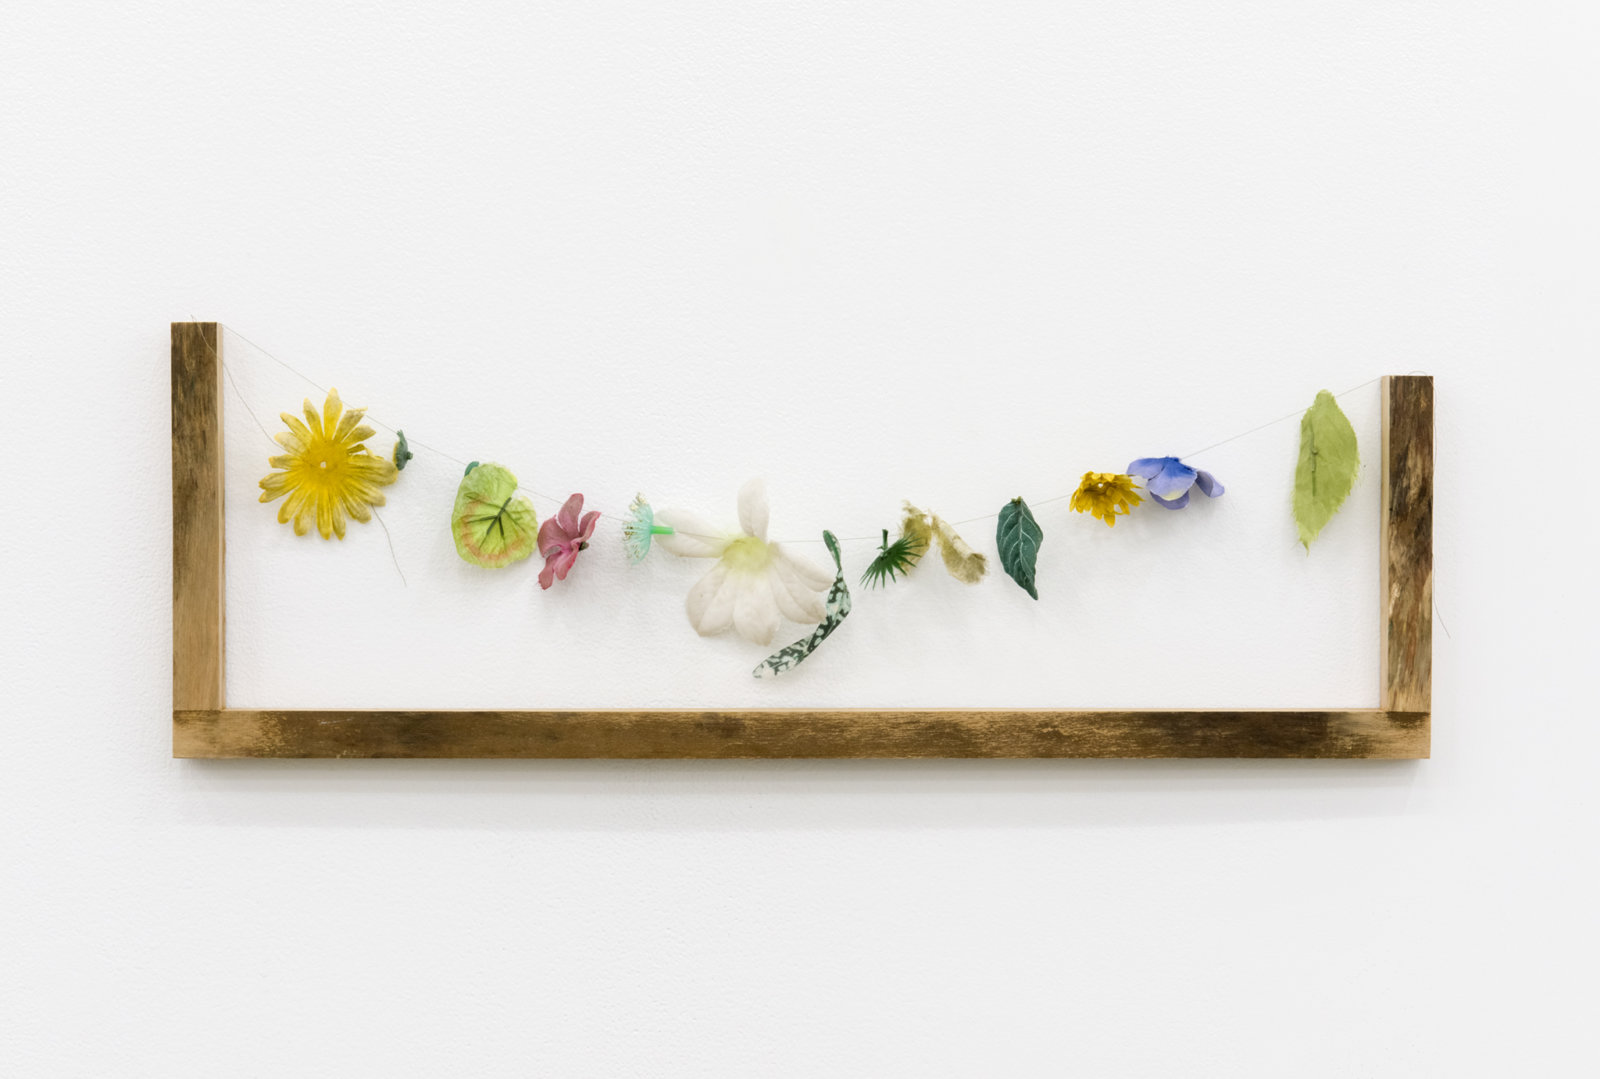 Ashes Withyman, Reminder (Cemetery Island), 2017, plastic flowers, thread, wood, 8 x 25 x 3 in. (21 x 62 x 6 cm)